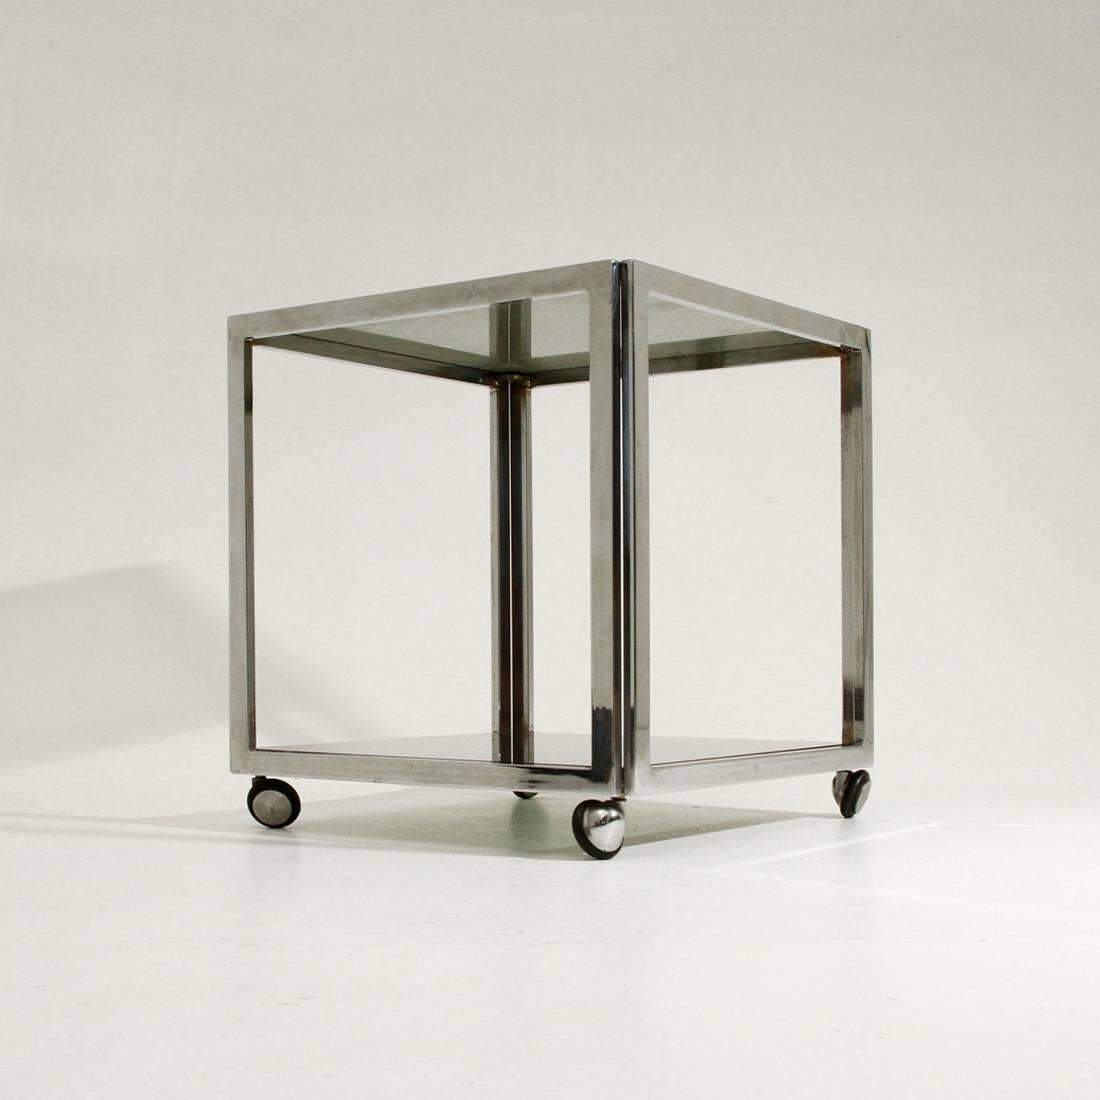 Nice table from the 1970s.
Square chromed metal structure, two glass shelves smoked, wheels to be moved.
Good general conditions.

Dimensions: Width 40 cm, depth 40 cm, height 42.5 cm.